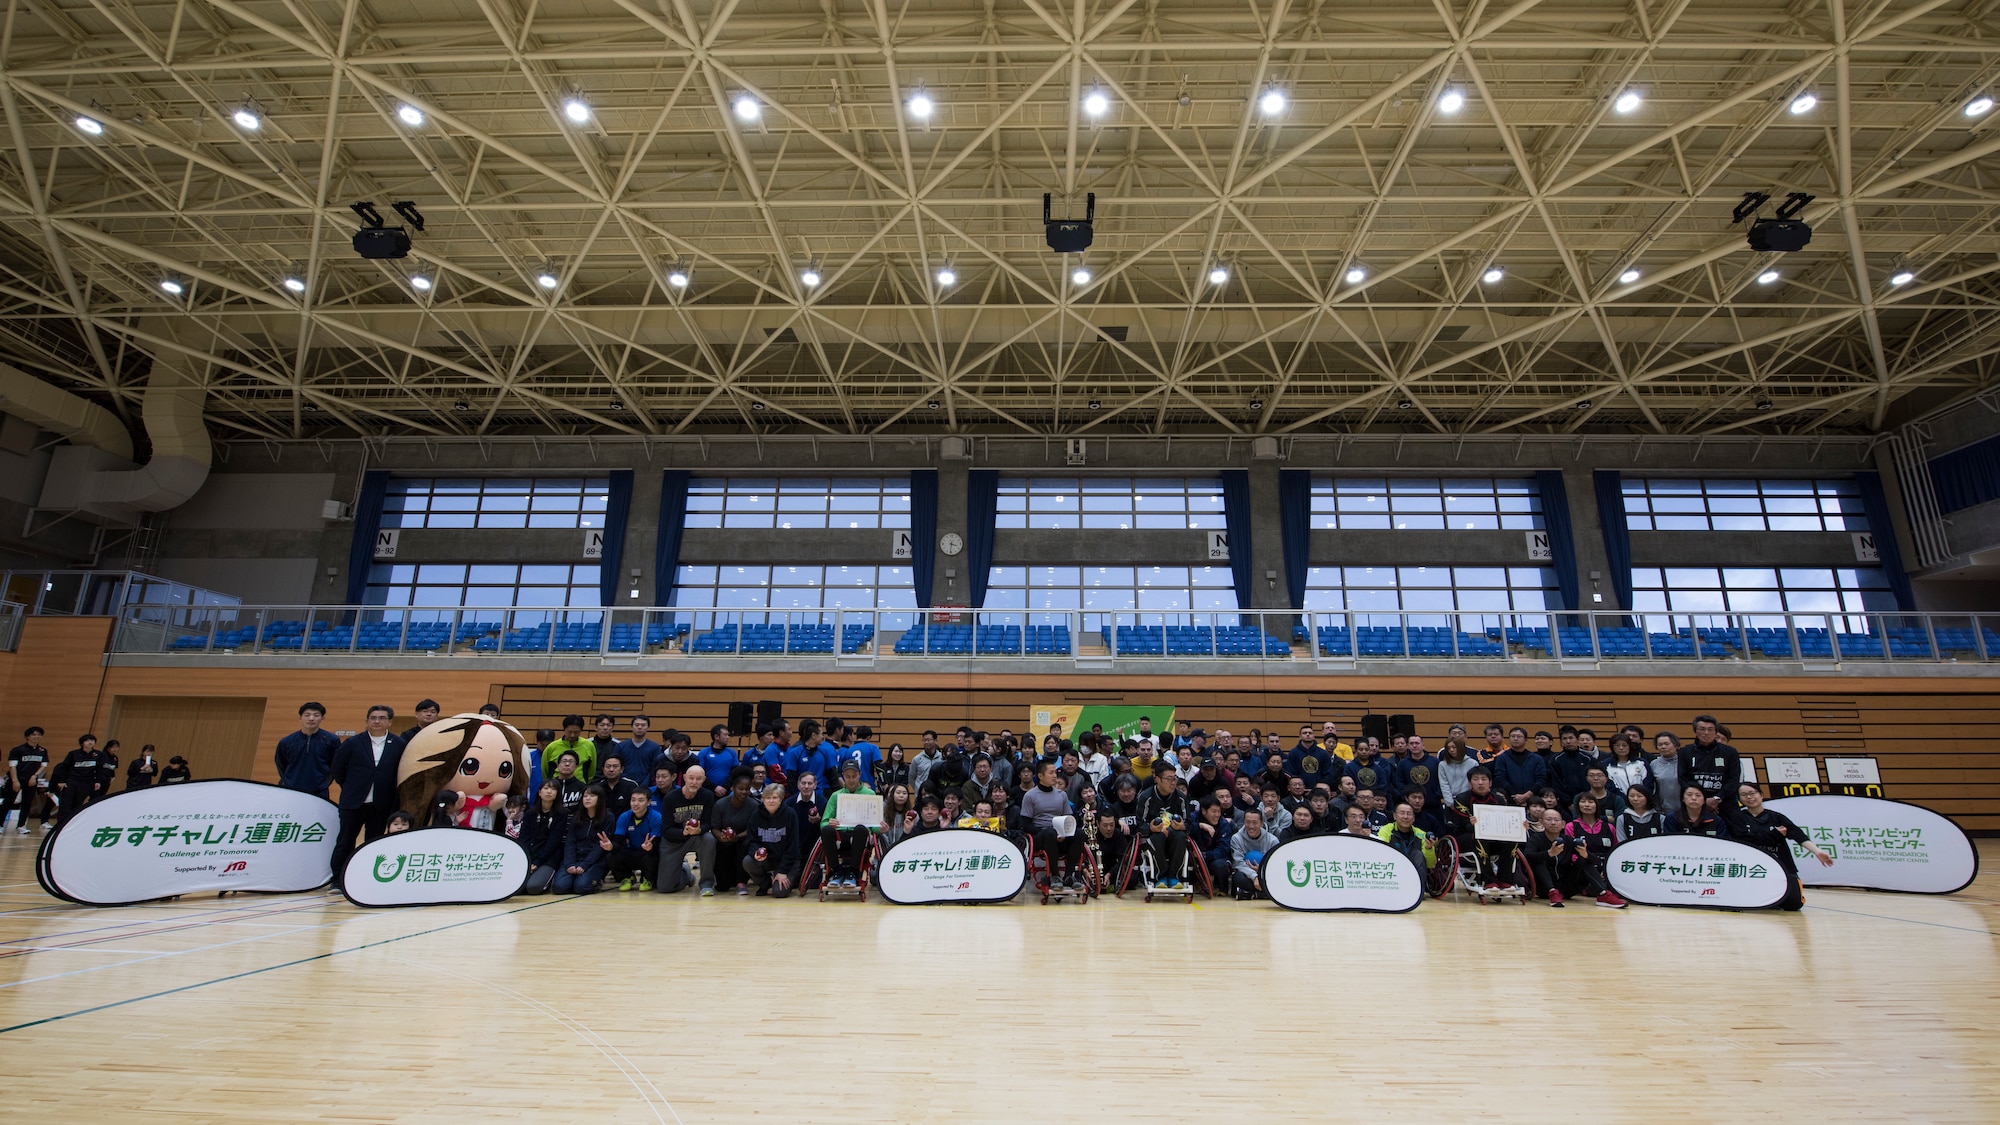 Paralympic attendees pose for a group photo during the Misawa City Paralympics tribute event at the Misawa International Sports Center in Misawa City, Japan, Dec. 1, 2018. In honor of the official Paralympics taking place in Tokyo, in 2020, city officials worked with the Nippon Paralympics committee to bring a modified version to the Misawa community. (U.S. Air Force photo by Airman 1st Class Collette Brooks)